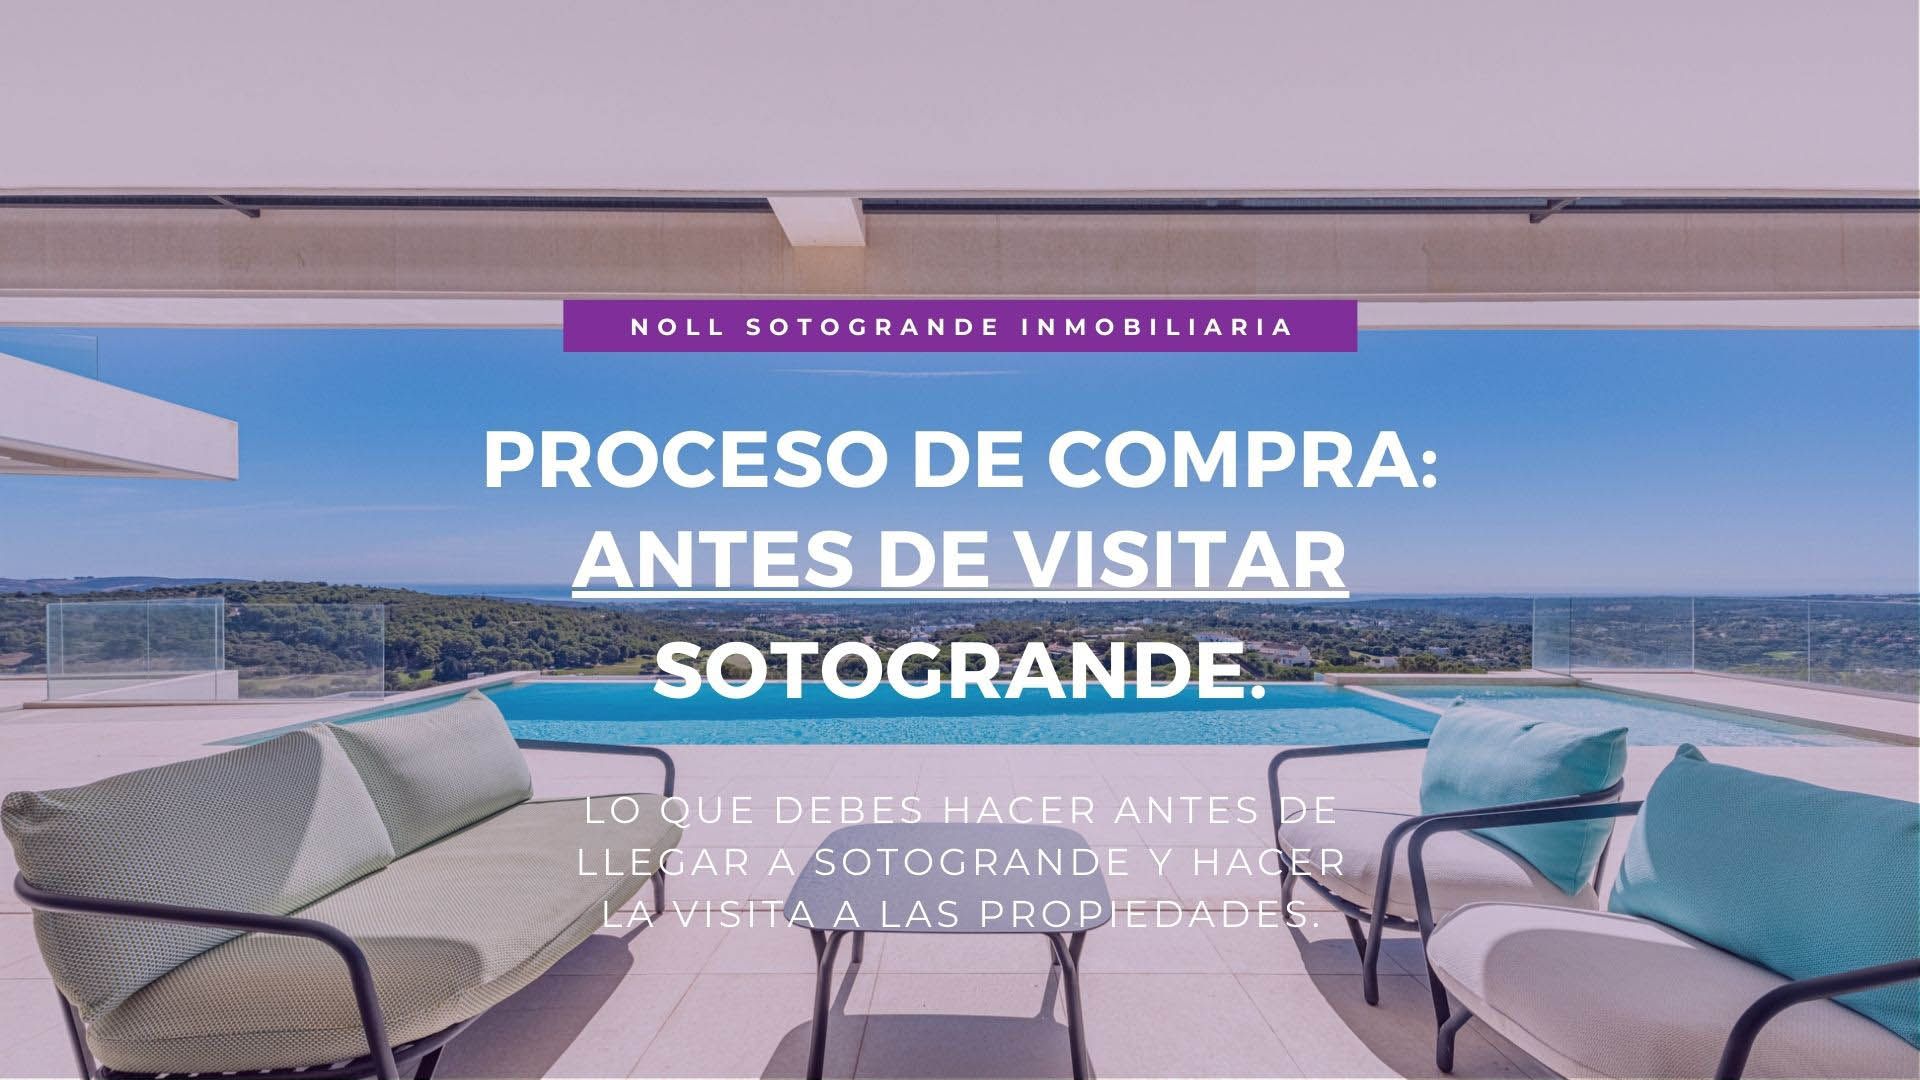 01: What you should do BEFORE you visit Sotogrande to look for a property